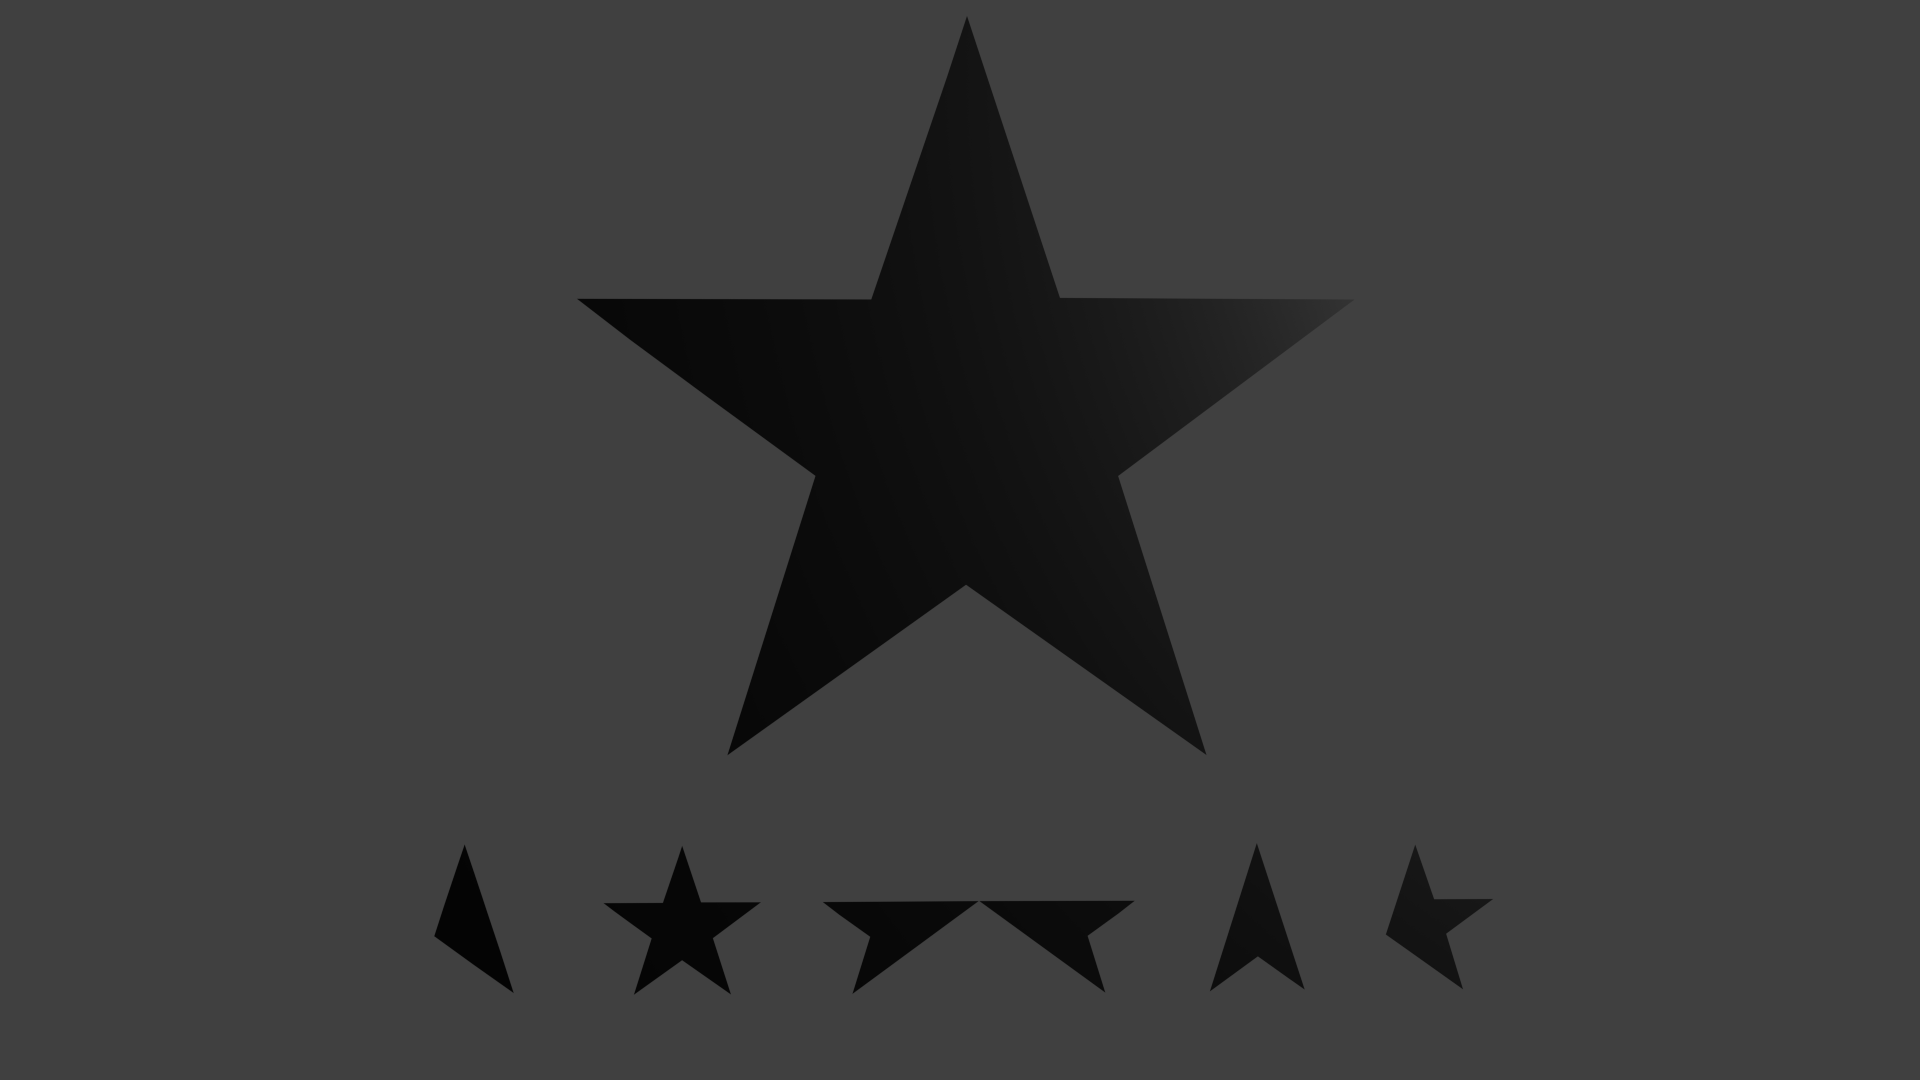 HQ Blackstar wallpaper, made with a 100% original 3D model which is